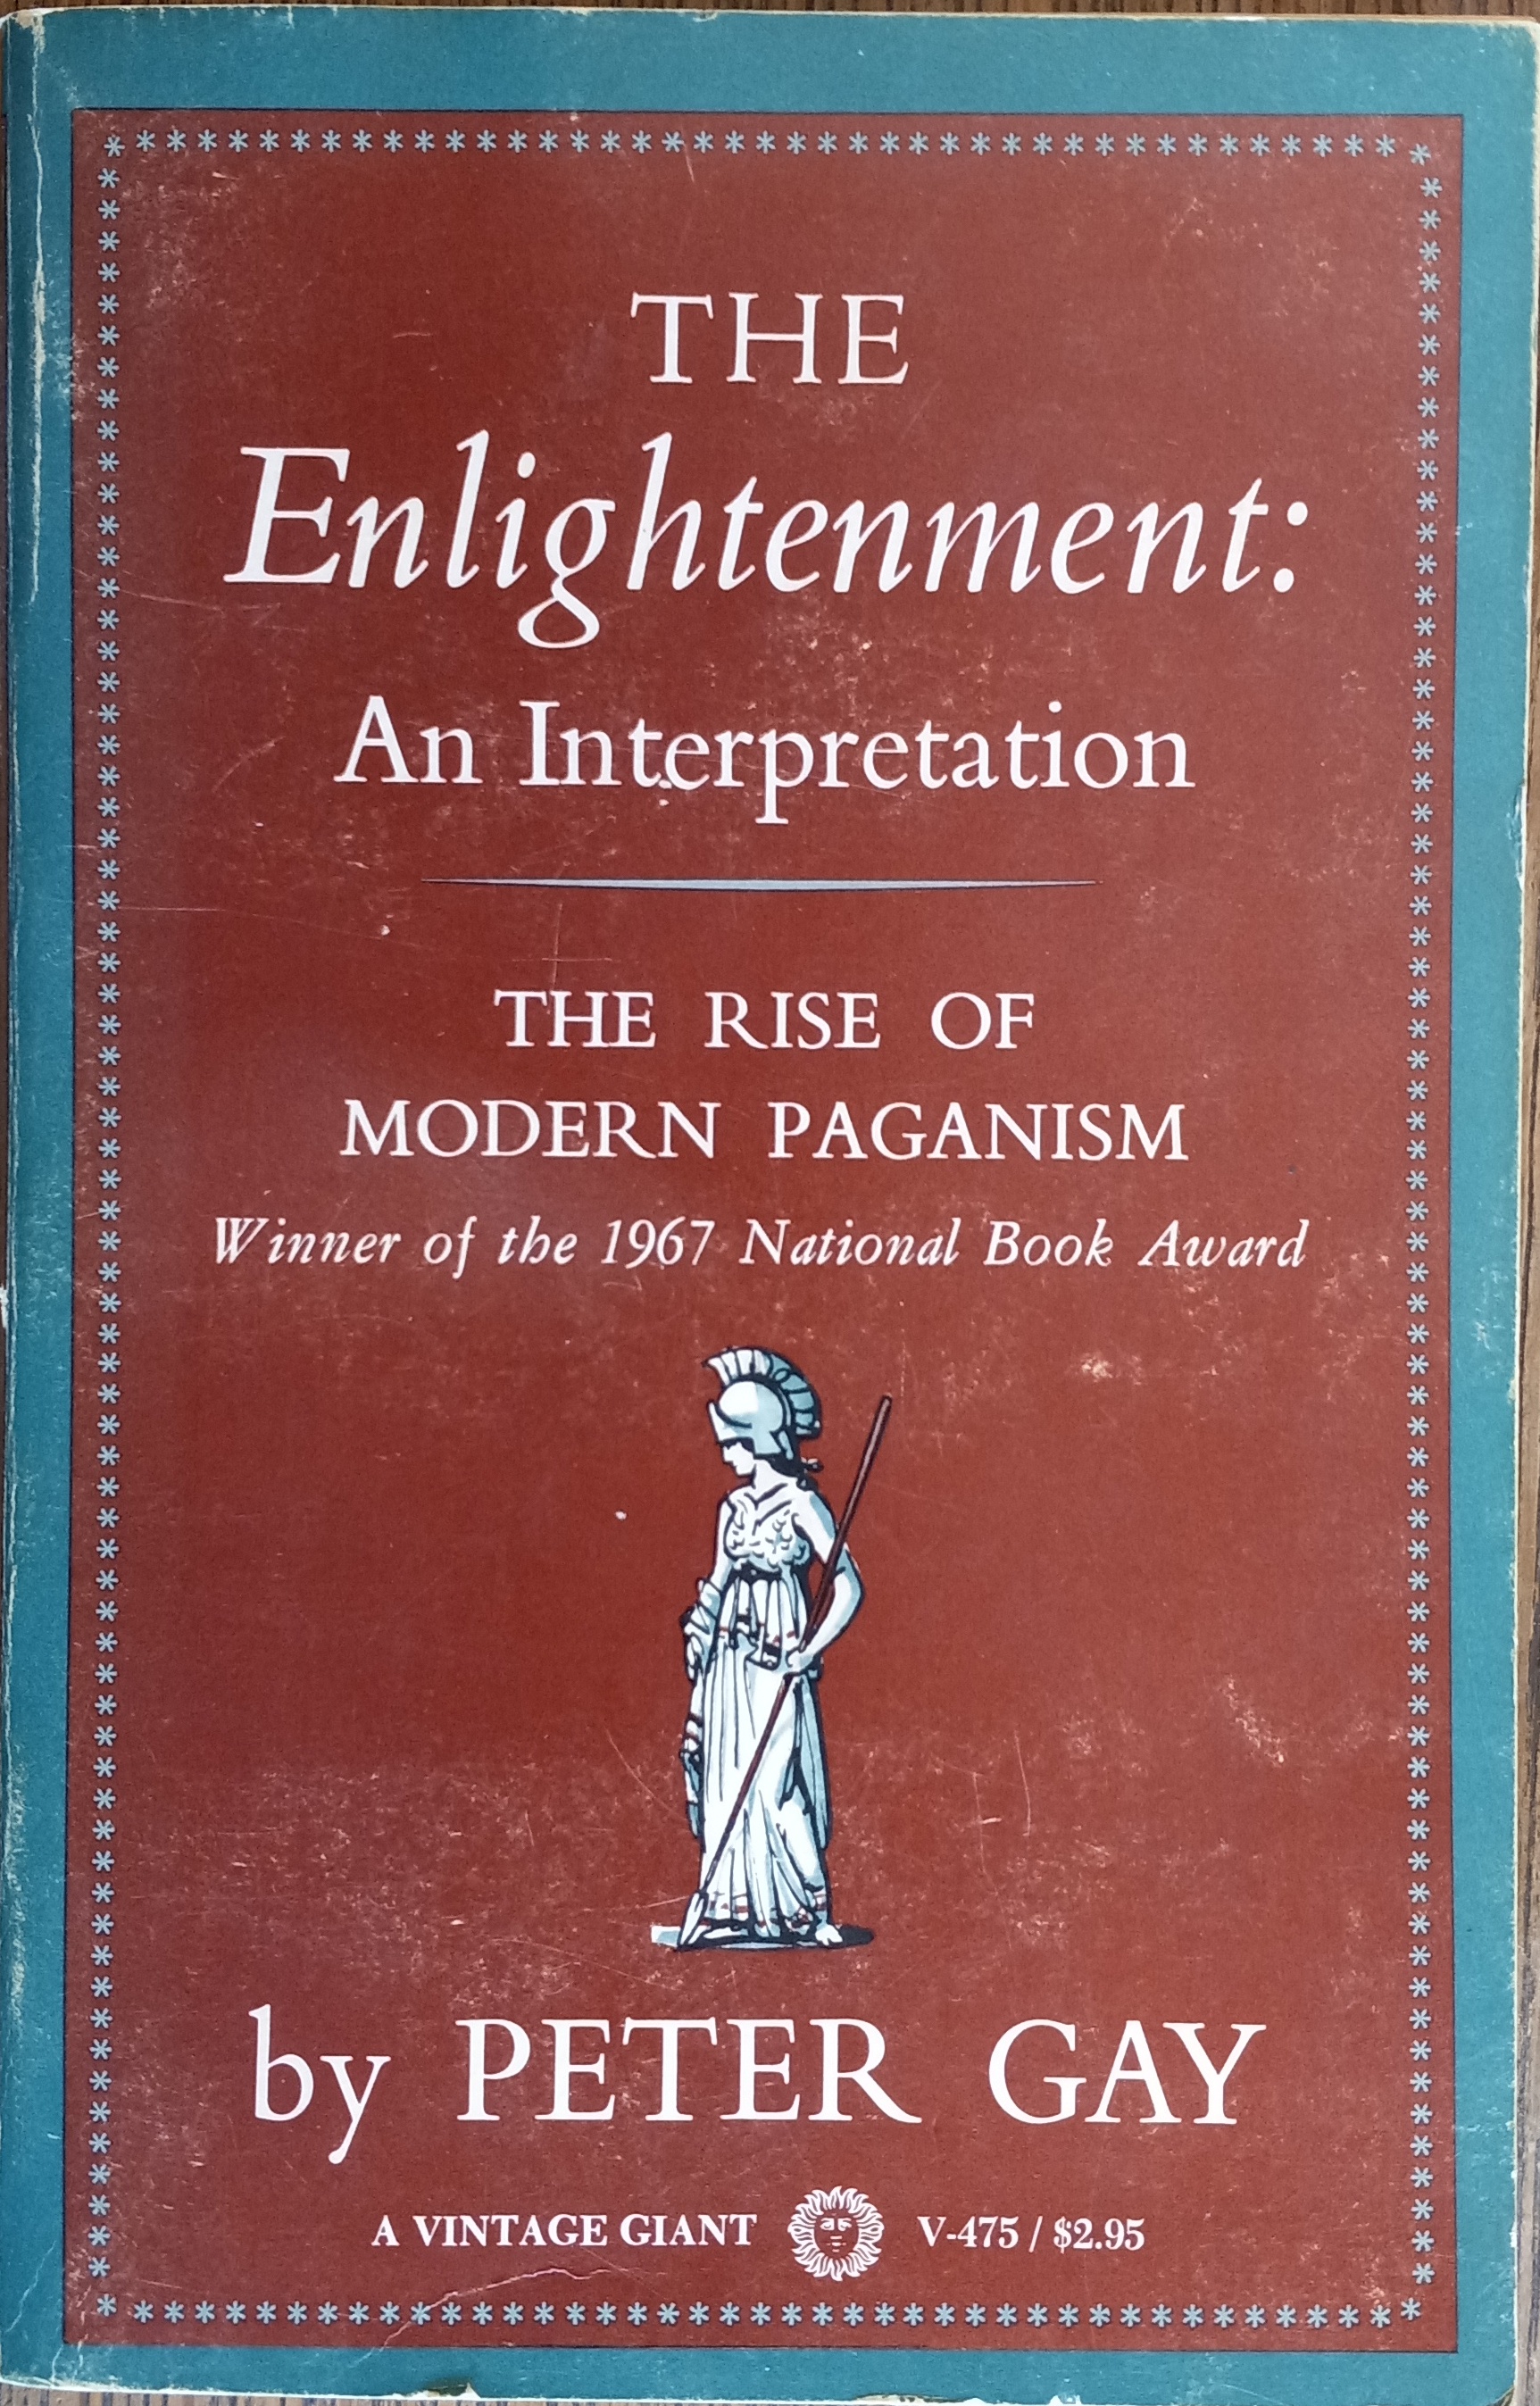 The Enlightenment: An Interpretation - The Rise of Modern Paganism (Vintage Giants V-475) - Gay, Peter